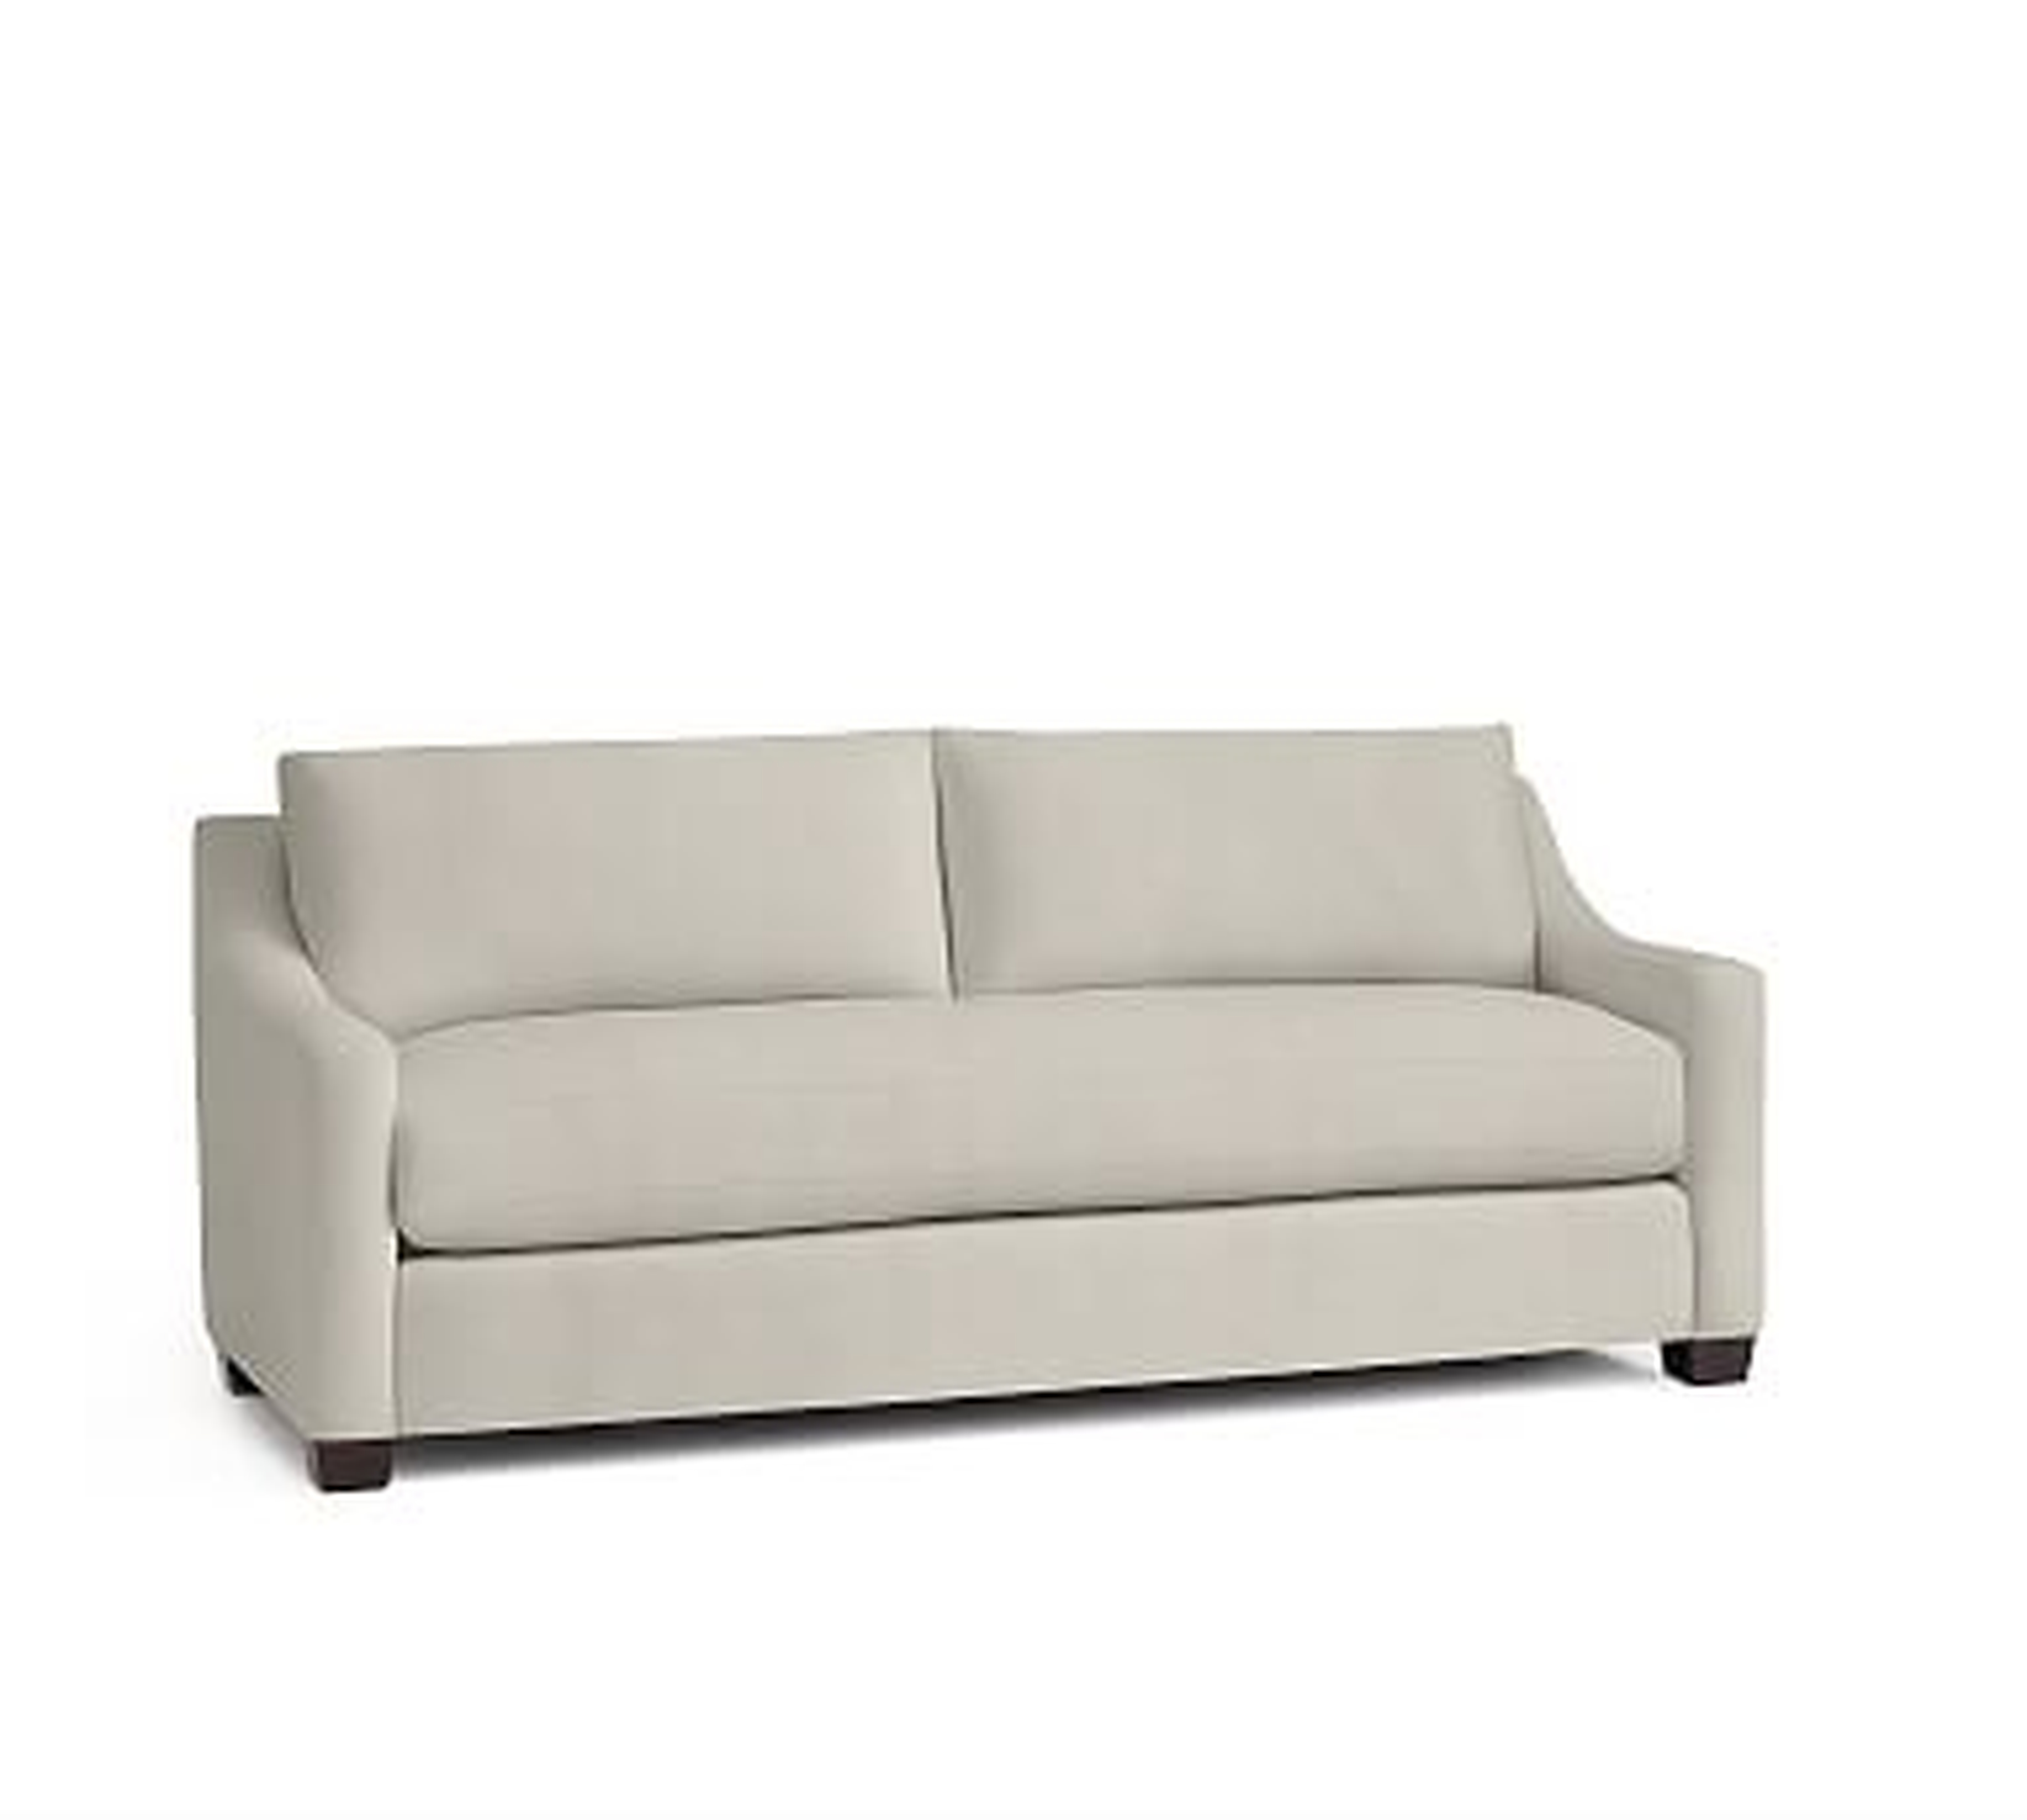 York Slope Arm Upholstered Loveseat 60.5" with Bench Cushion, Down Blend Wrapped Cushions, Performance Everydaysuede(TM) Stone - Pottery Barn